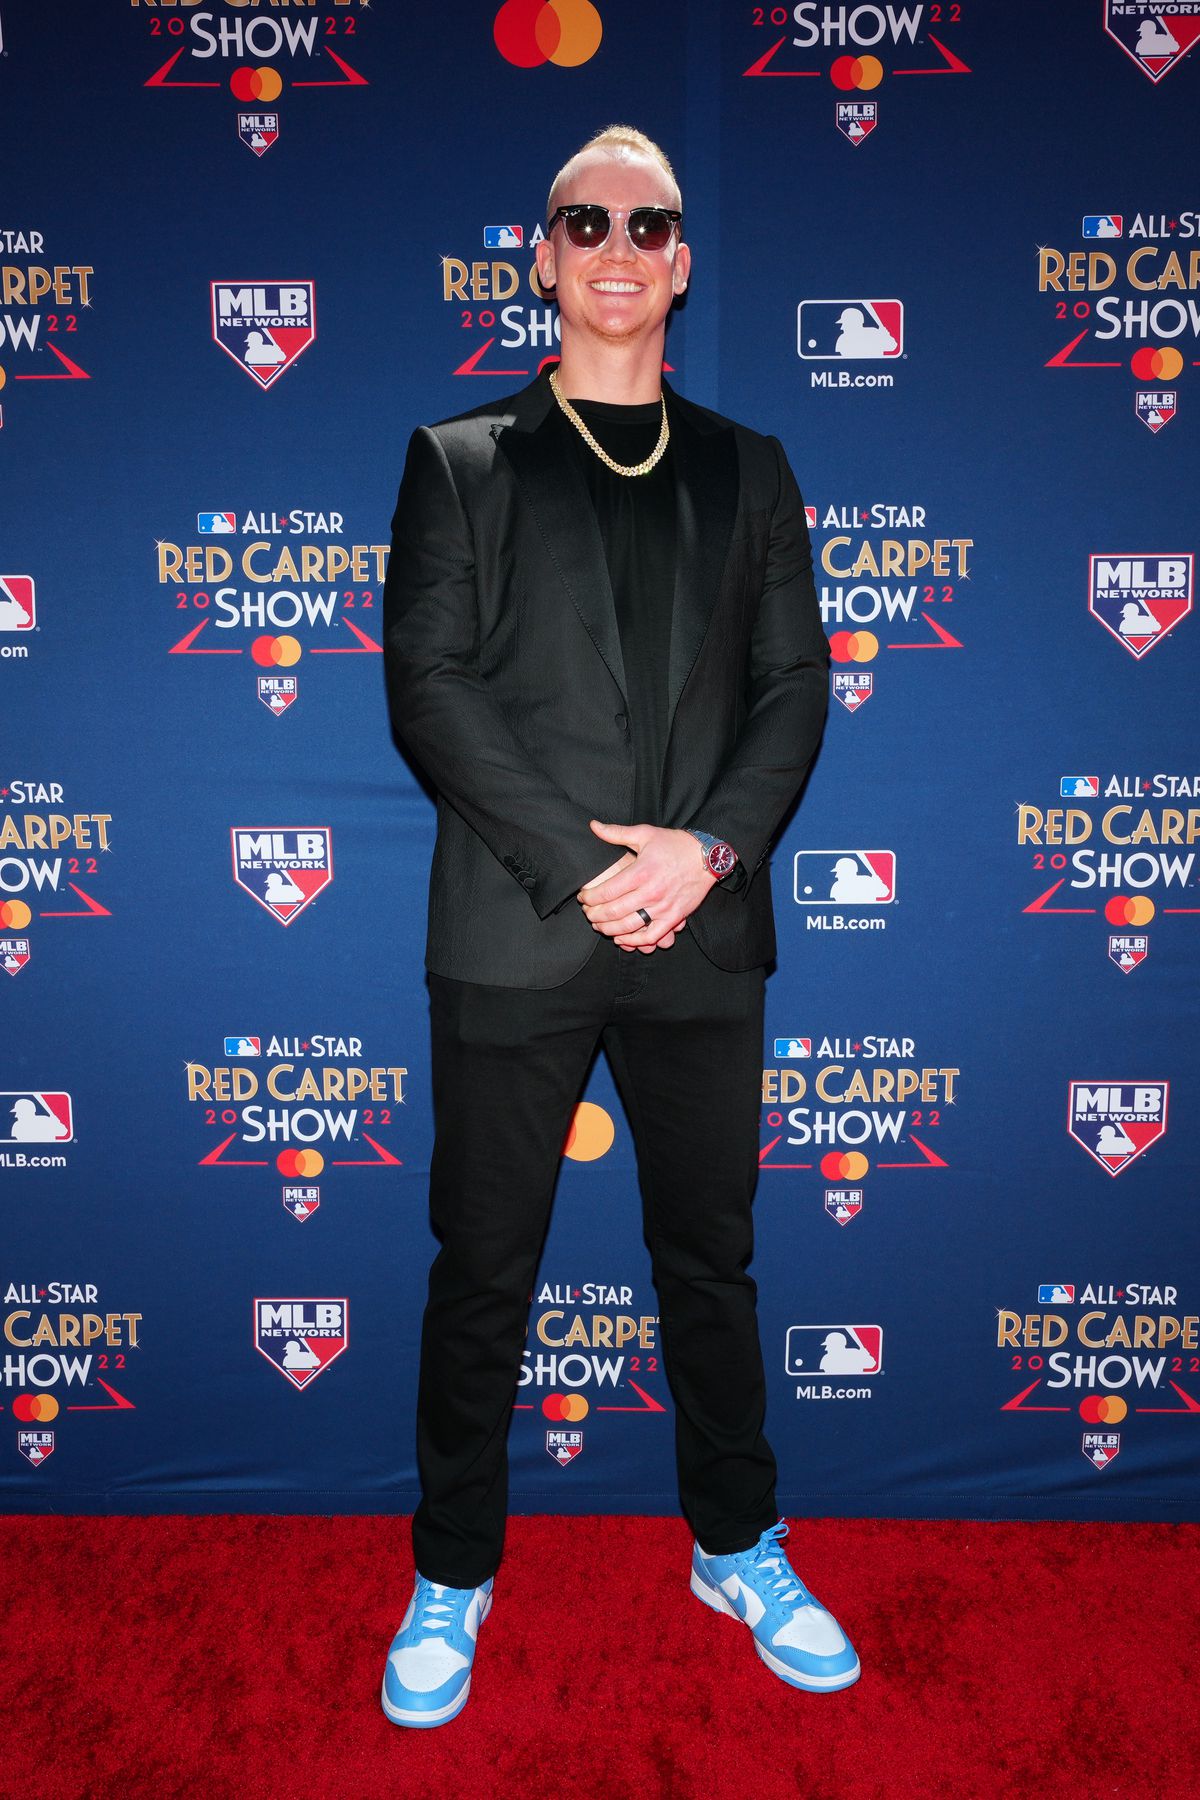 All-Star Red Carpet Show